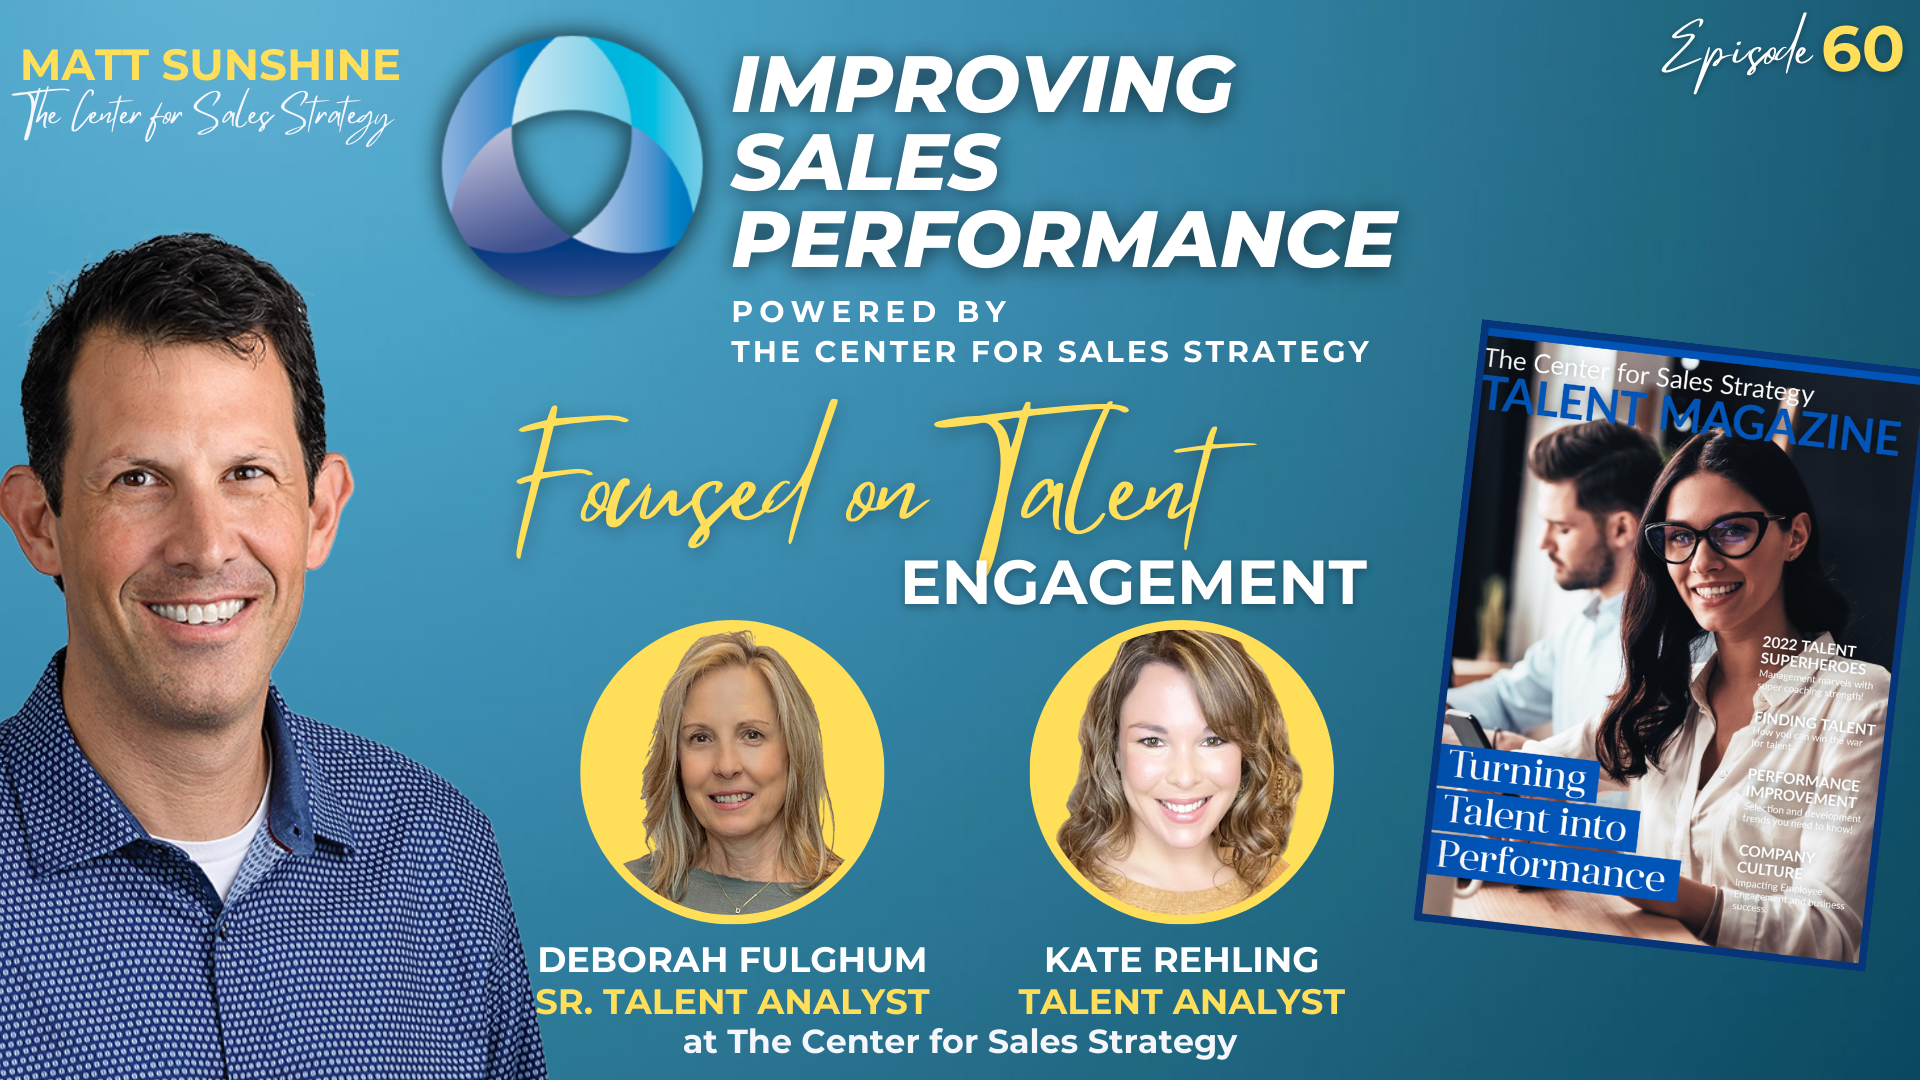 Focused on Talent: Engagement with Deborah Fulghum and Kate Rehling